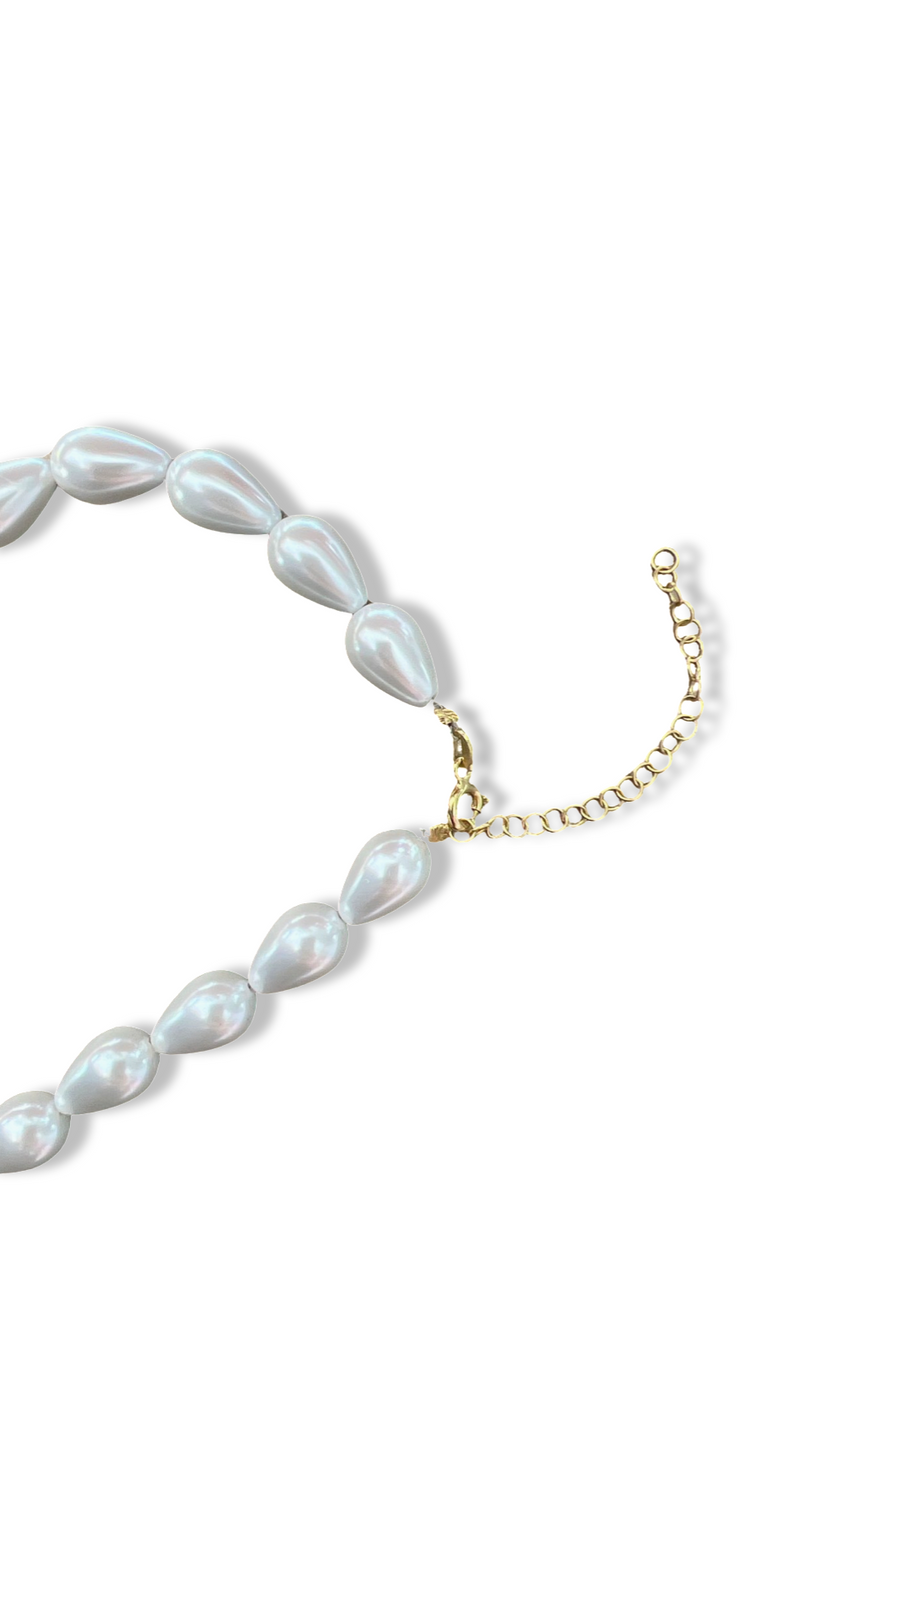 Yasmin pearl necklace - oval